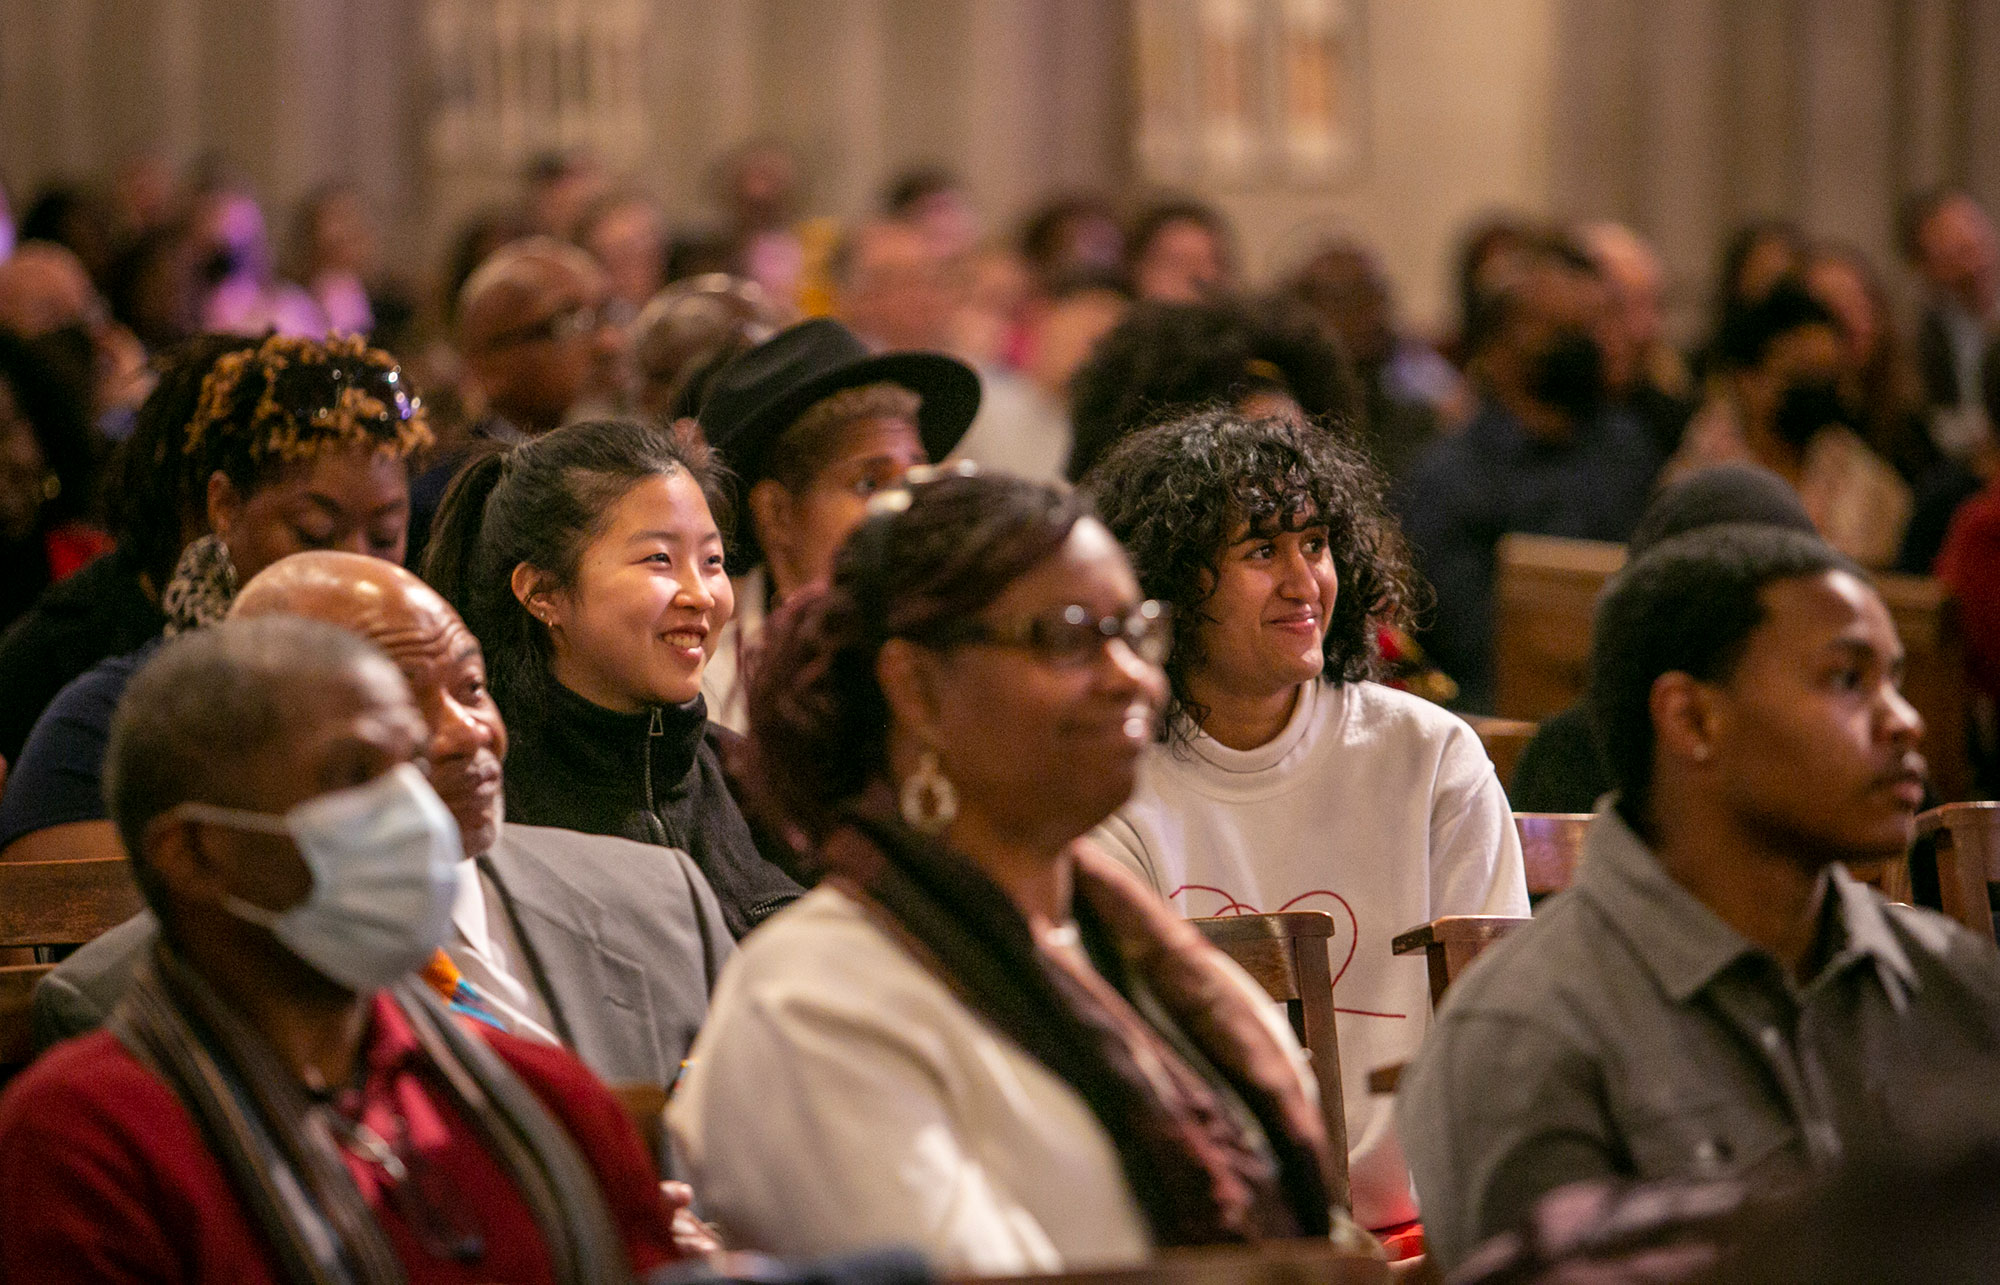 More than 250 people attended the event in Duke Chapel.
